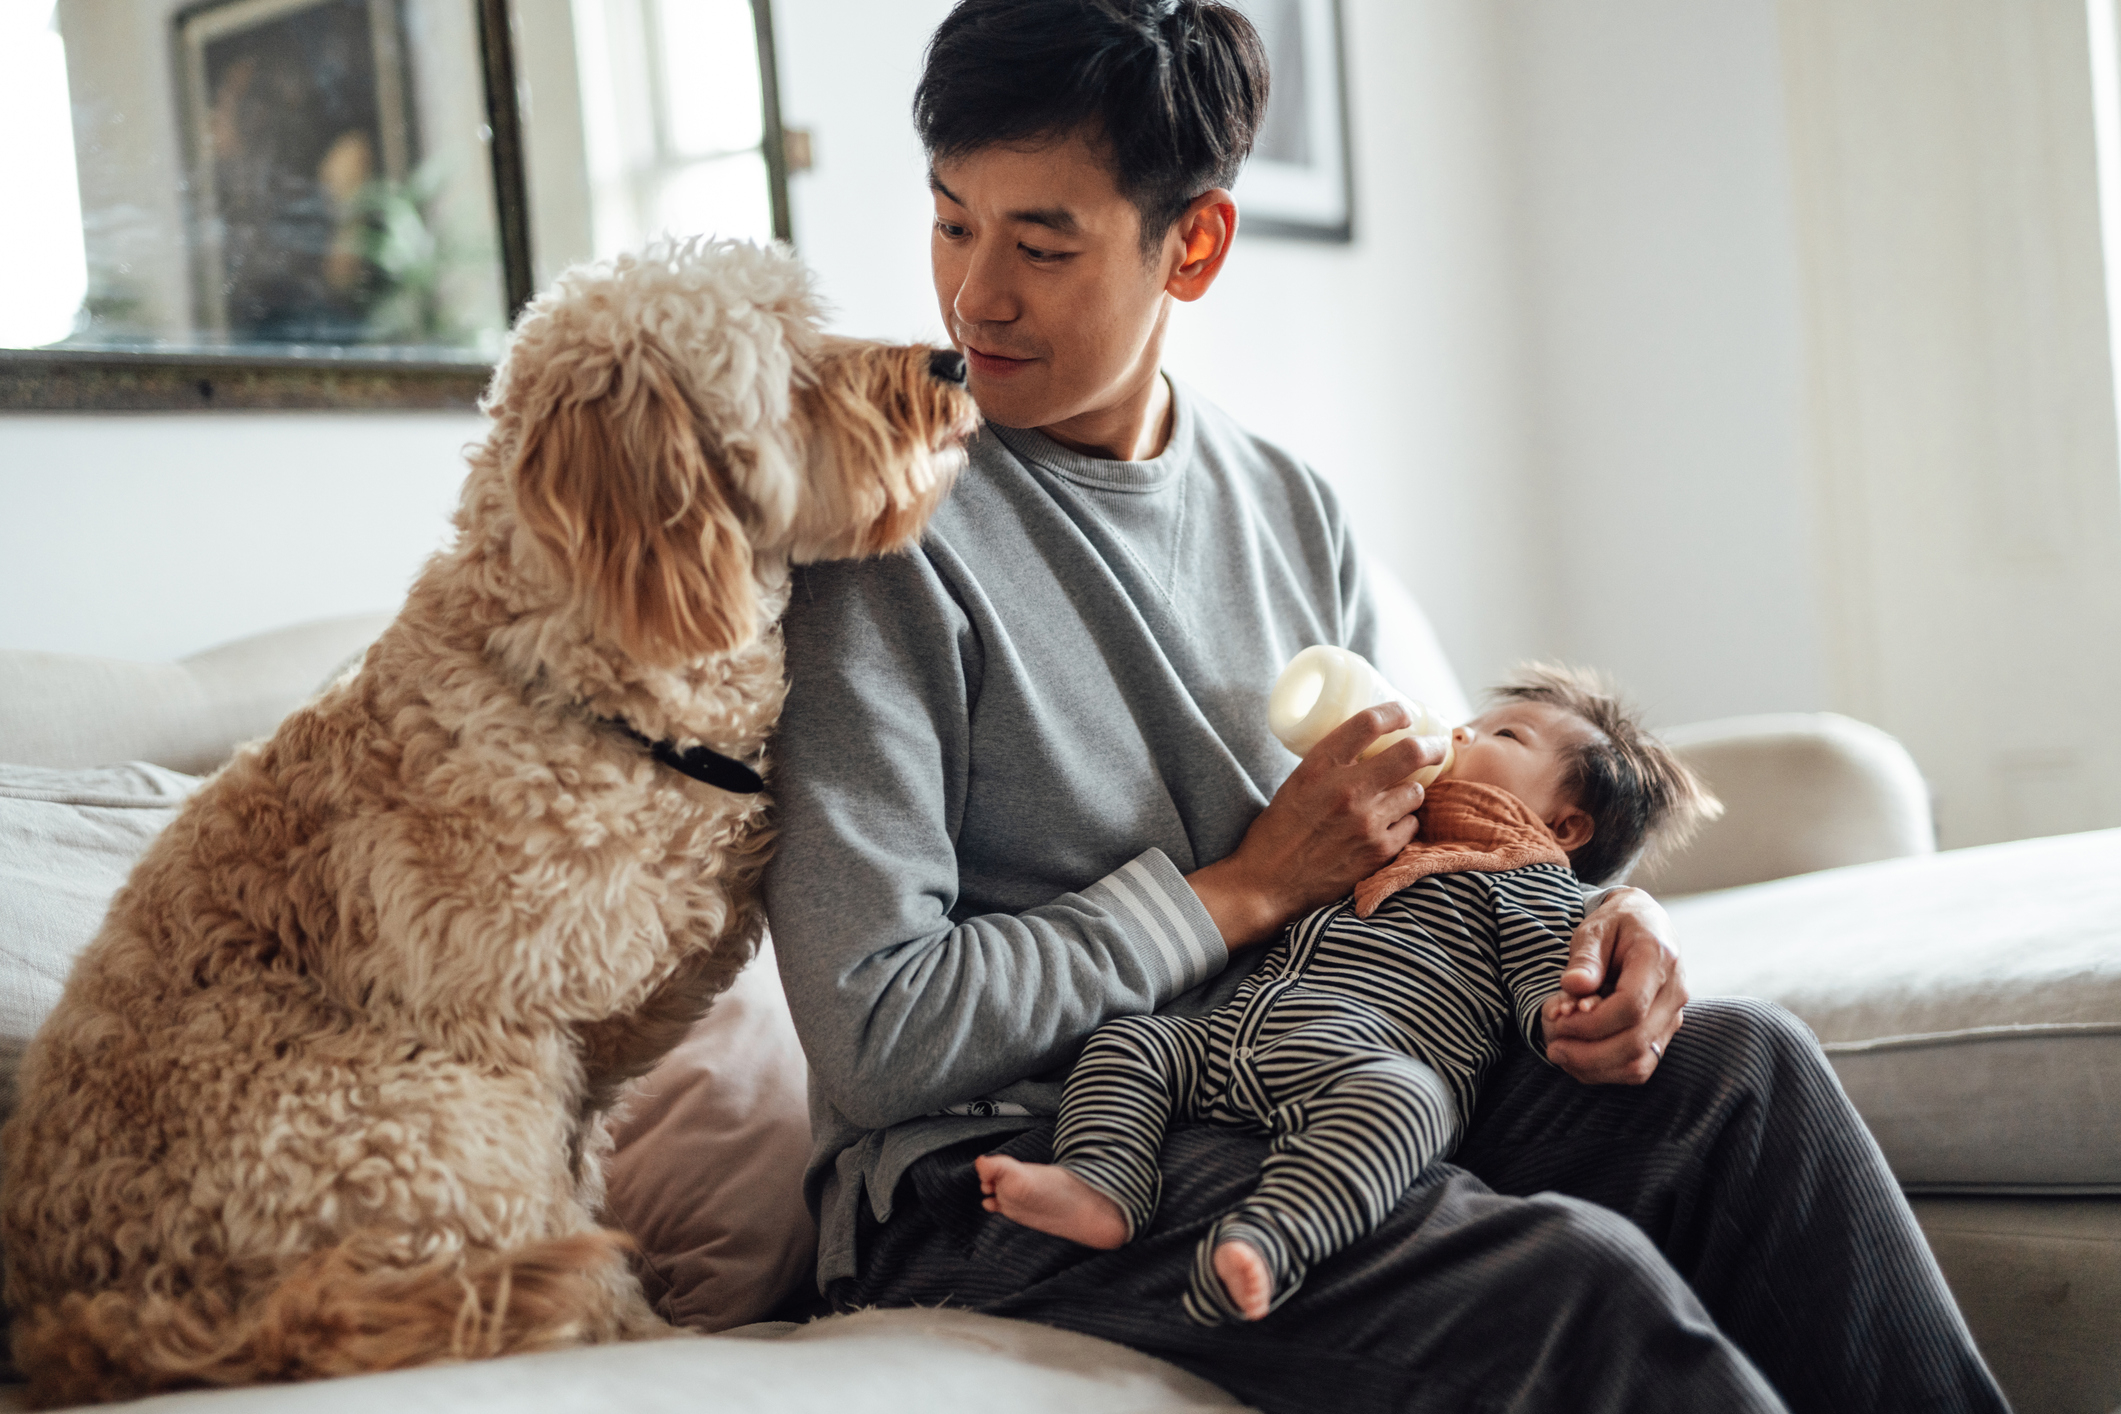 father feeding his baby with their dog next to him